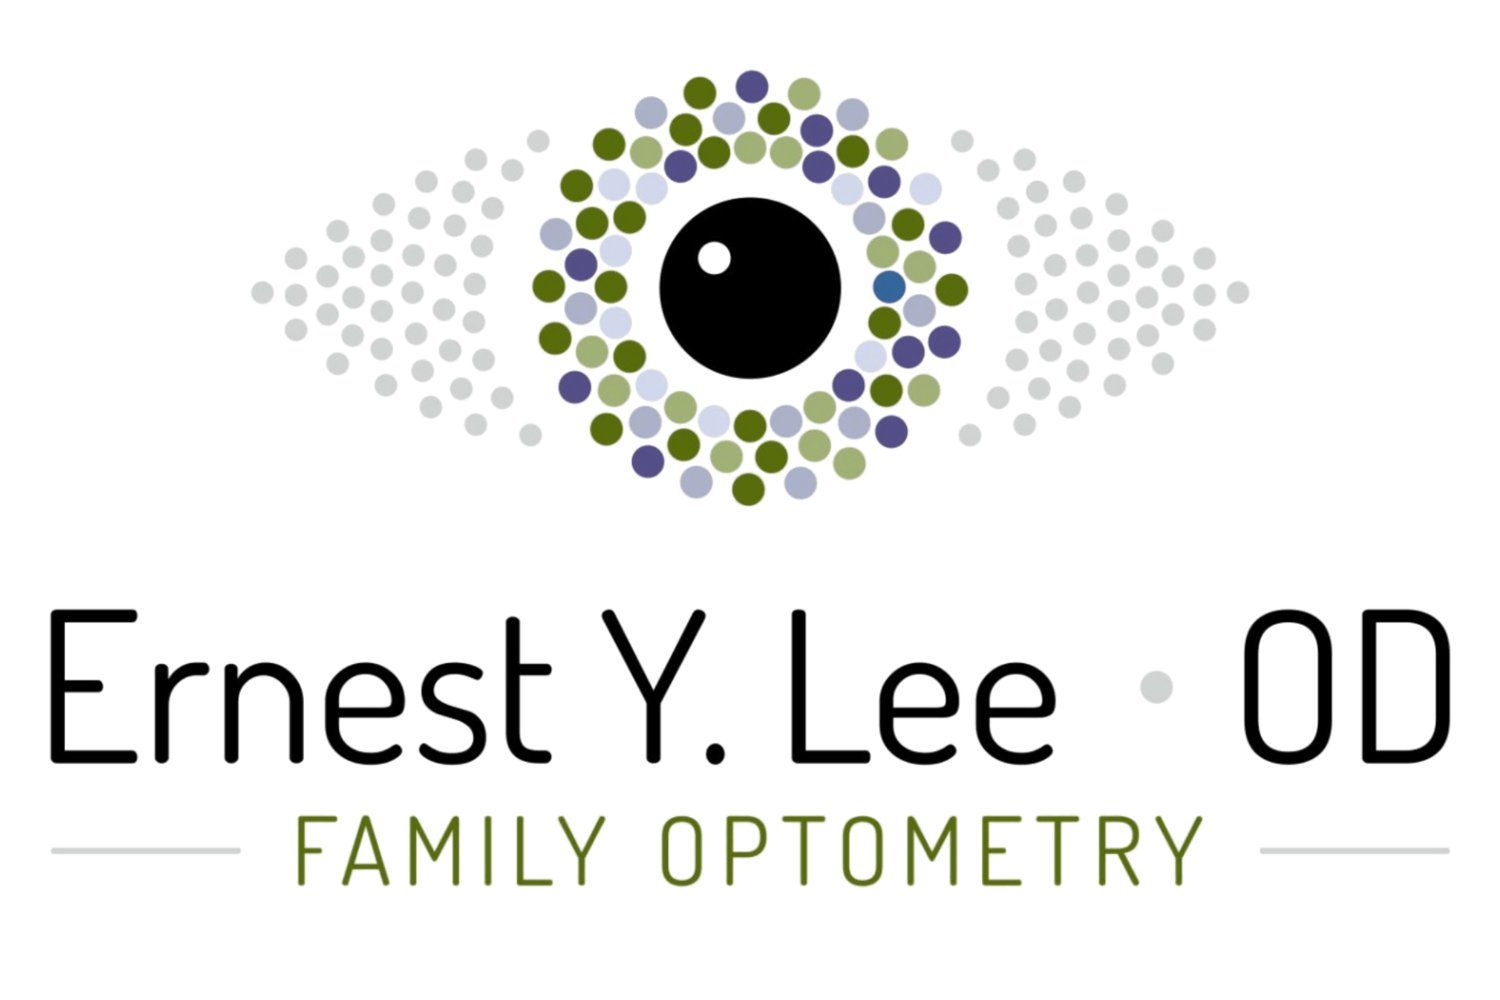 Ernest Y. Lee, O.D. - Family Optometry